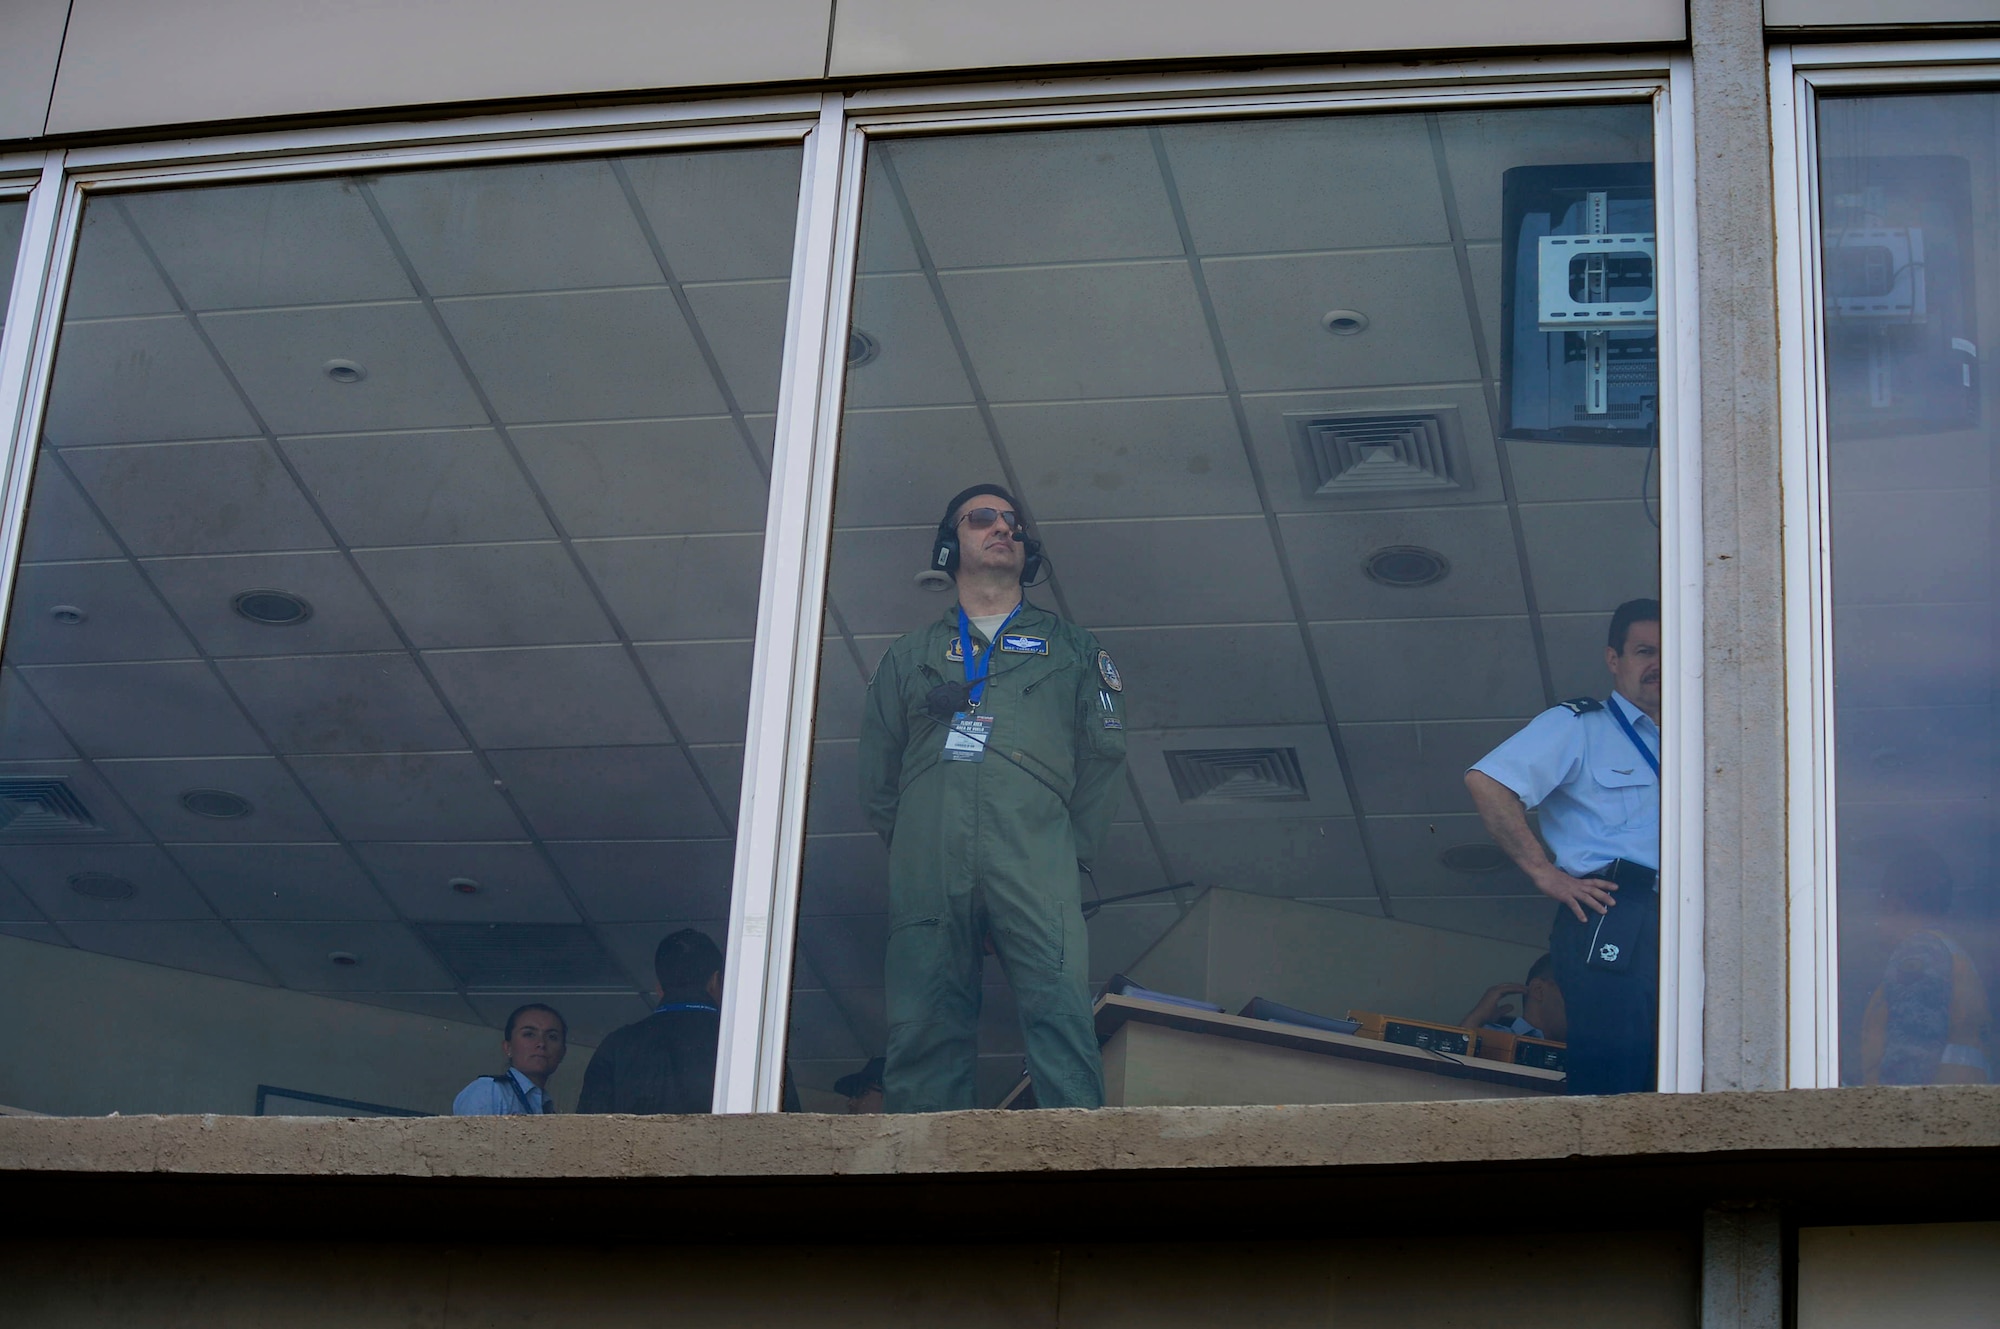 U.S. Air Force Col. Mike Torrealday, Reserve Advisor to the 12th AF (AFSOUTH) Commander and AFSOUTH mission commander for FIDAE, watches the certification demonstrations for the 2016 International Air and Space Fair (FIDAE) in Santiago, Chile, March 28, 2016. Airmen from around the U.S. are scheduled to participate in a variety of activities during the week-long air show that includes aerial demonstrations, interaction with the local community, and subject matter expert exchanges with the Chilean air force. (U.S. Air Force photo by Tech. Sgt. Heather Redman/Released)